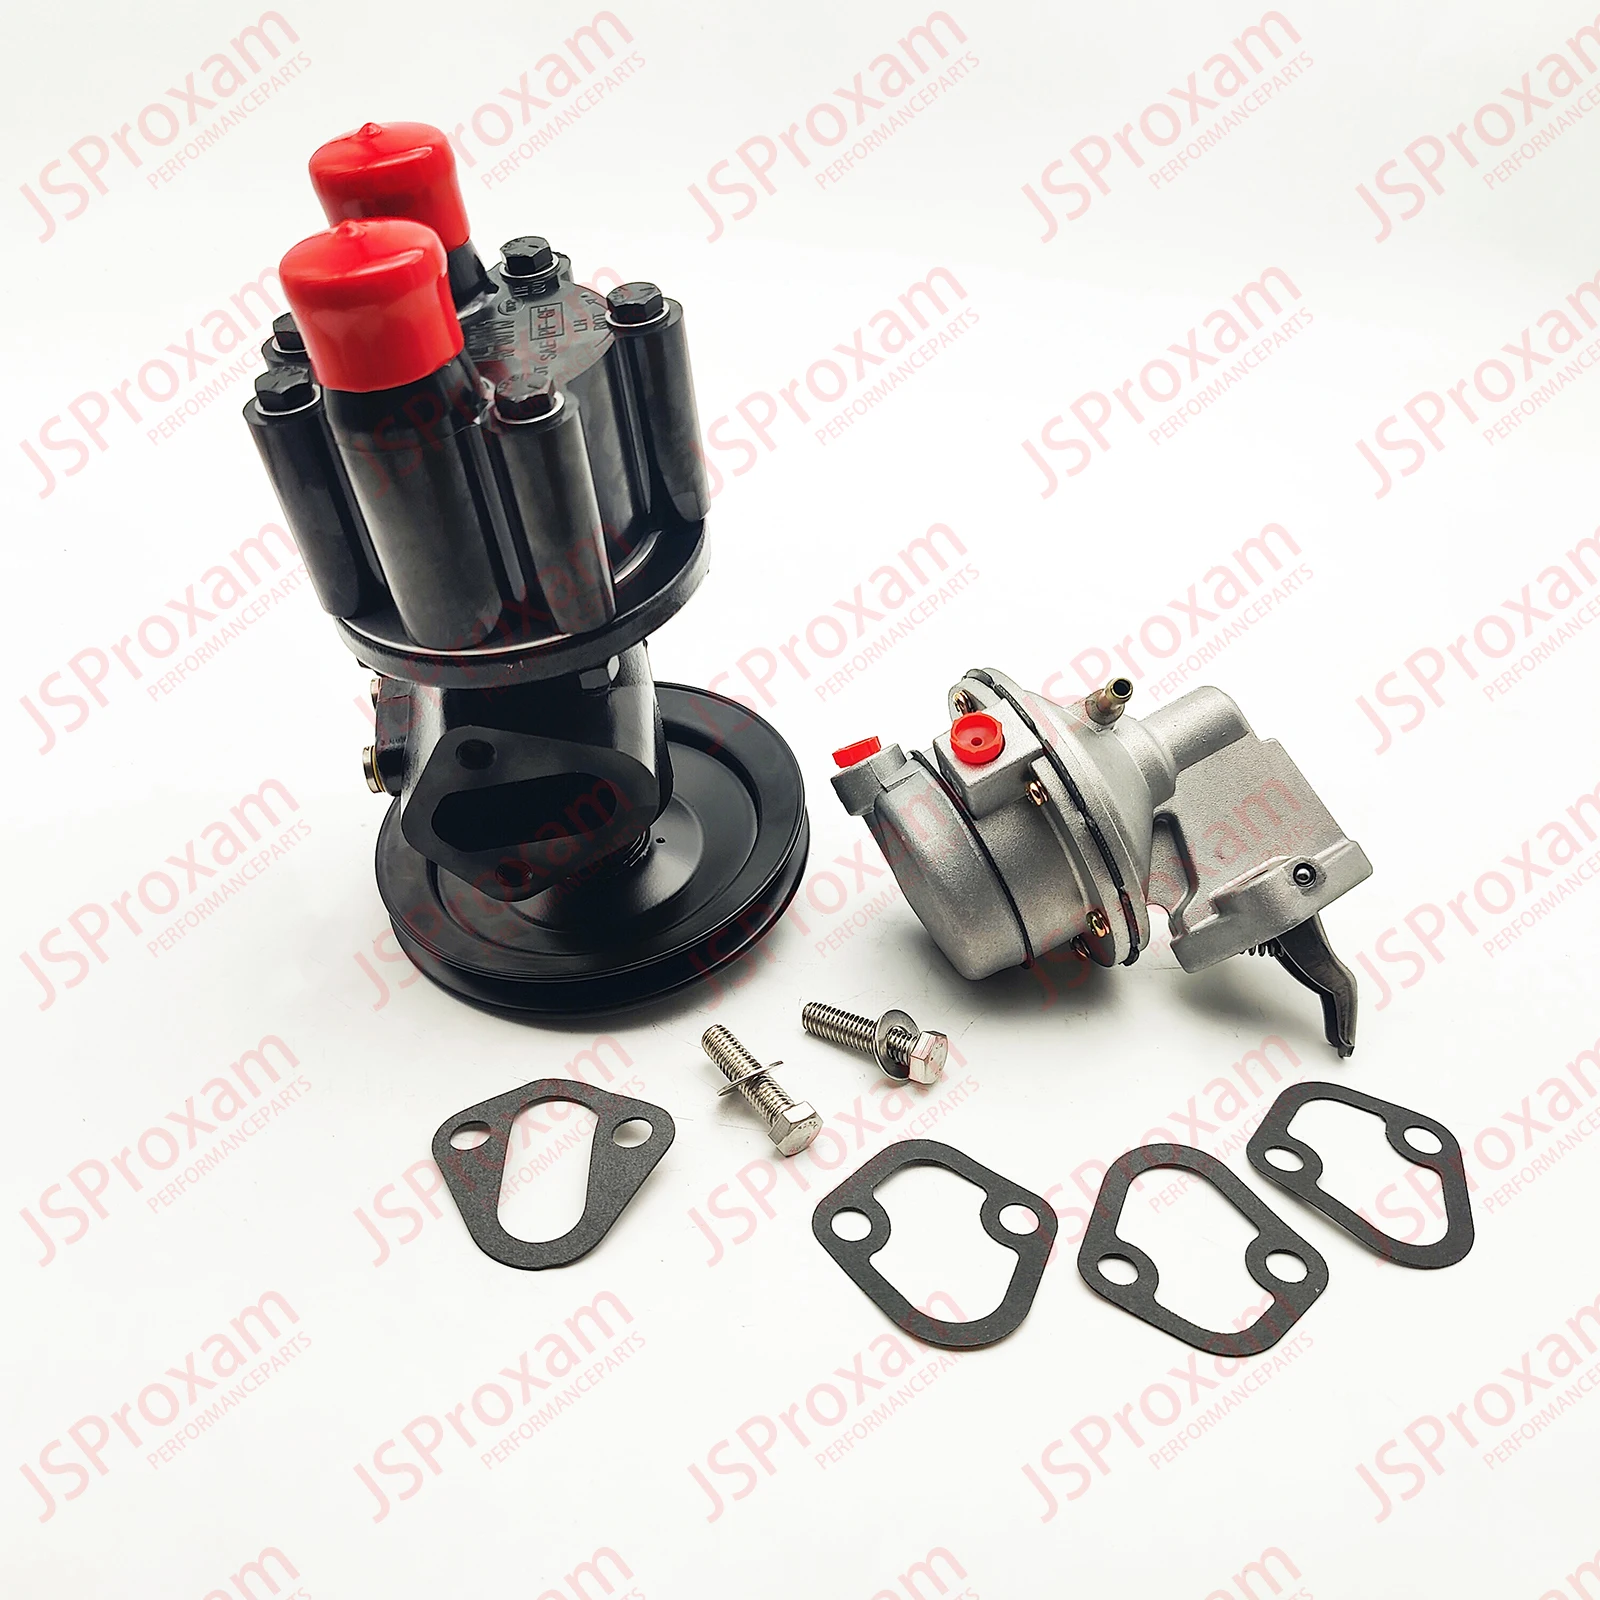 46-807151A8 861677T Replaces Fit For MerCruiser 46-807151A 8 88383T 18-8860 454 & 502 Water Pump & Fuel Pump Kit